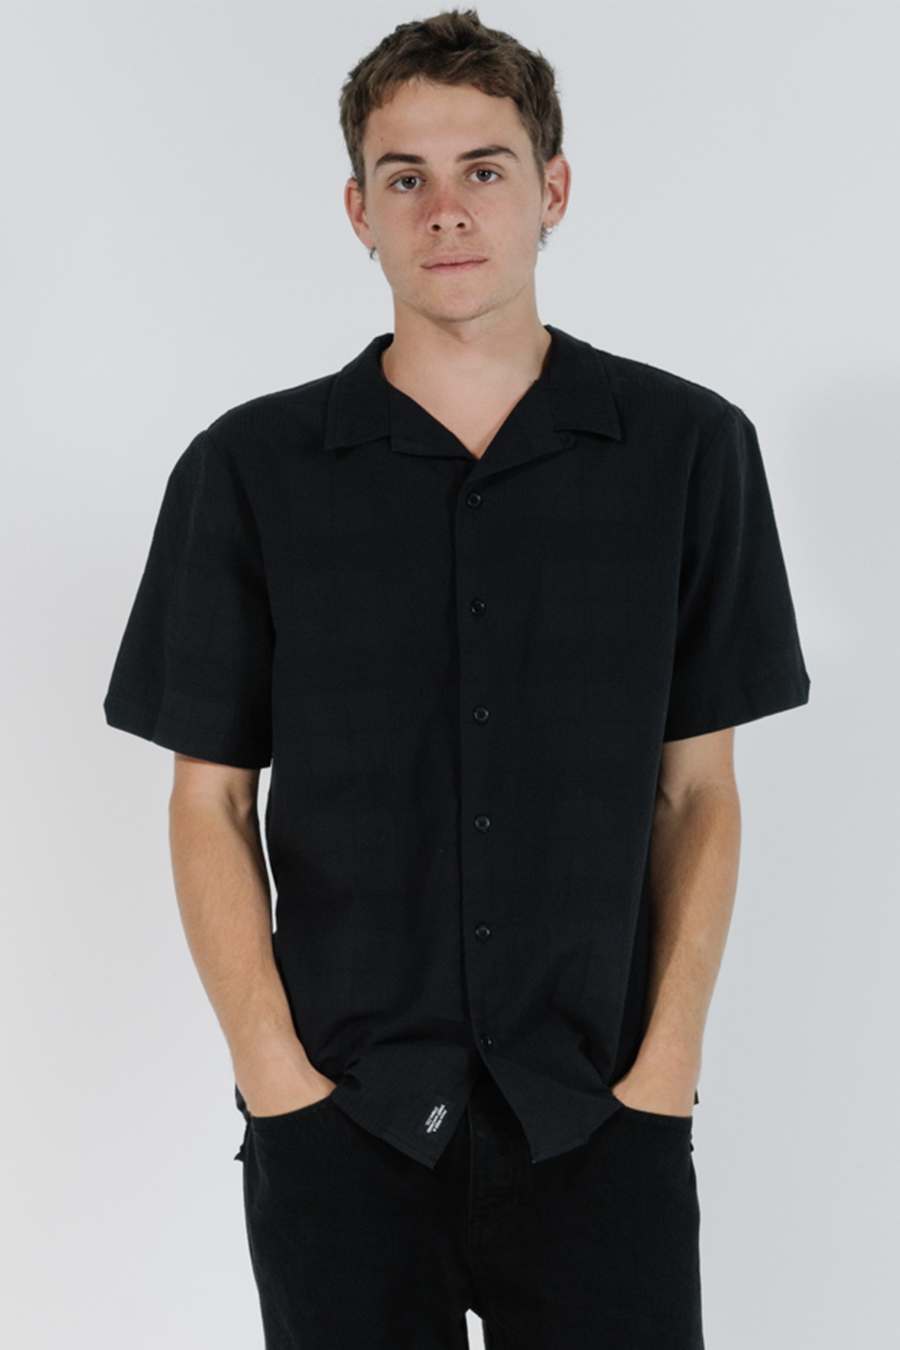 Republic Bowling Shirt | Black - West of Camden - Main Image Number 1 of 1